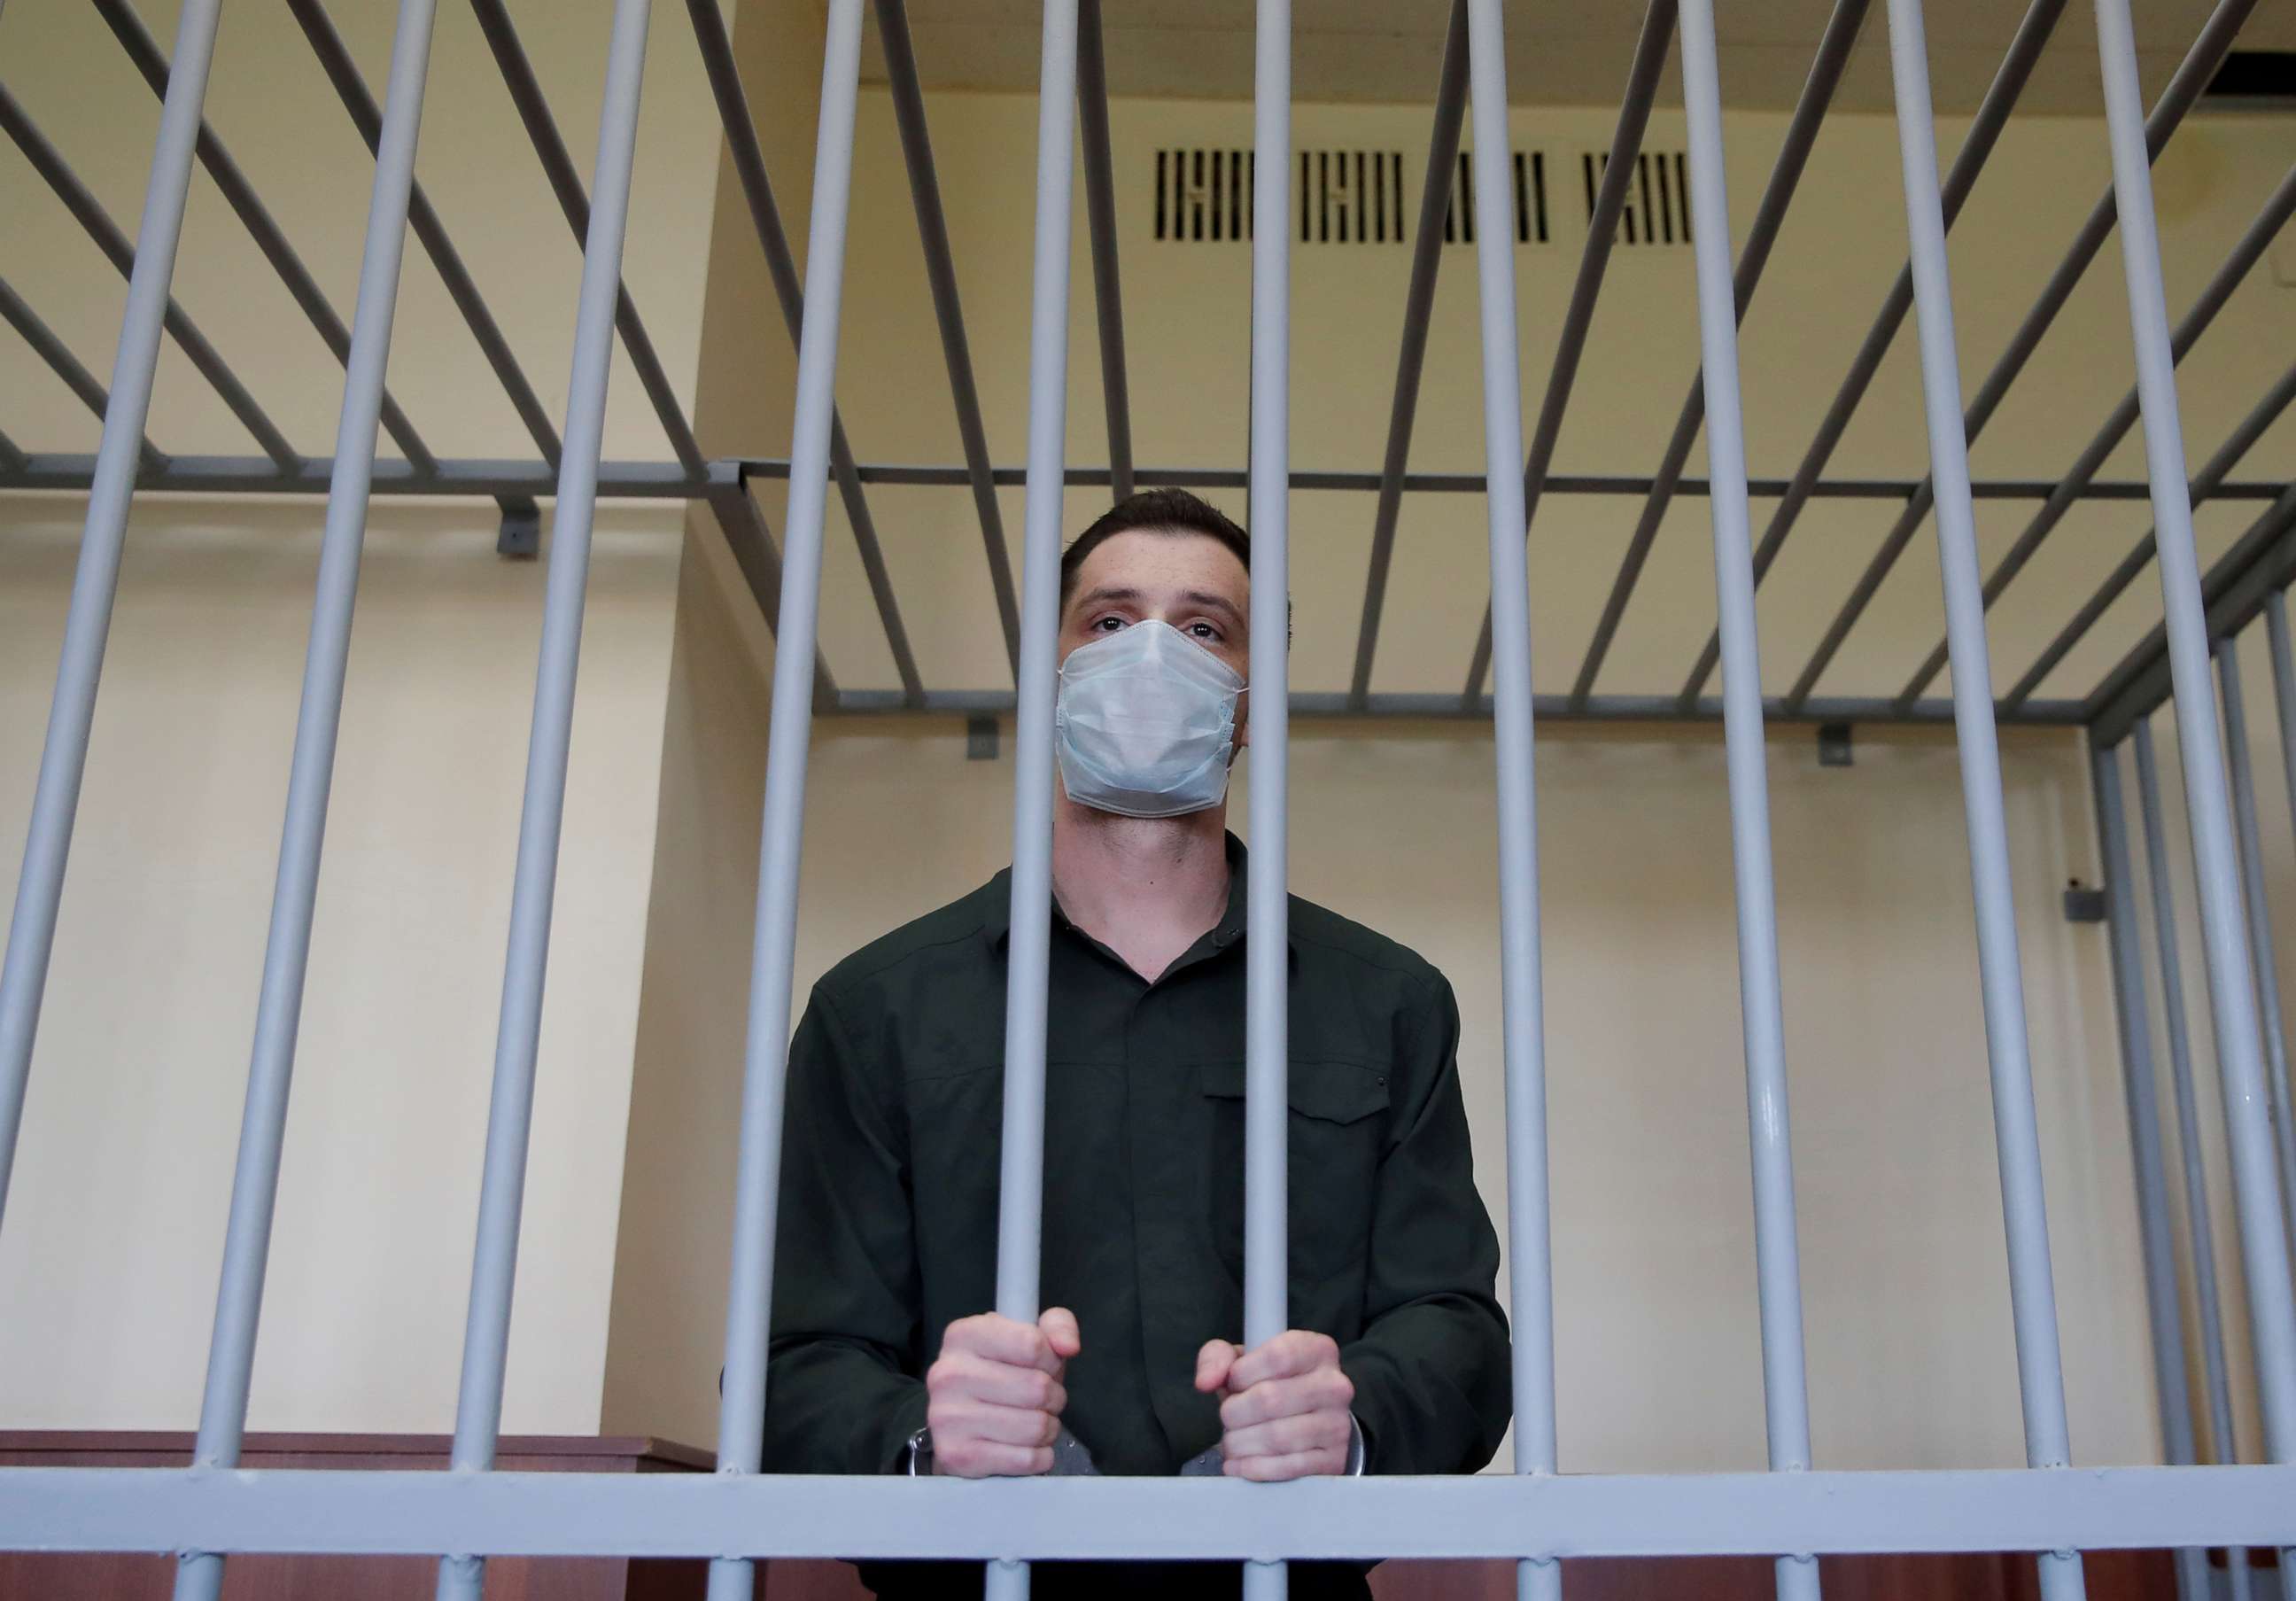 PHOTO: Former Marine Trevor Reed, who was detained in 2019 and accused of assaulting police officers, stands inside a defendants' cage during a court hearing in Moscow, July 30, 2020. 